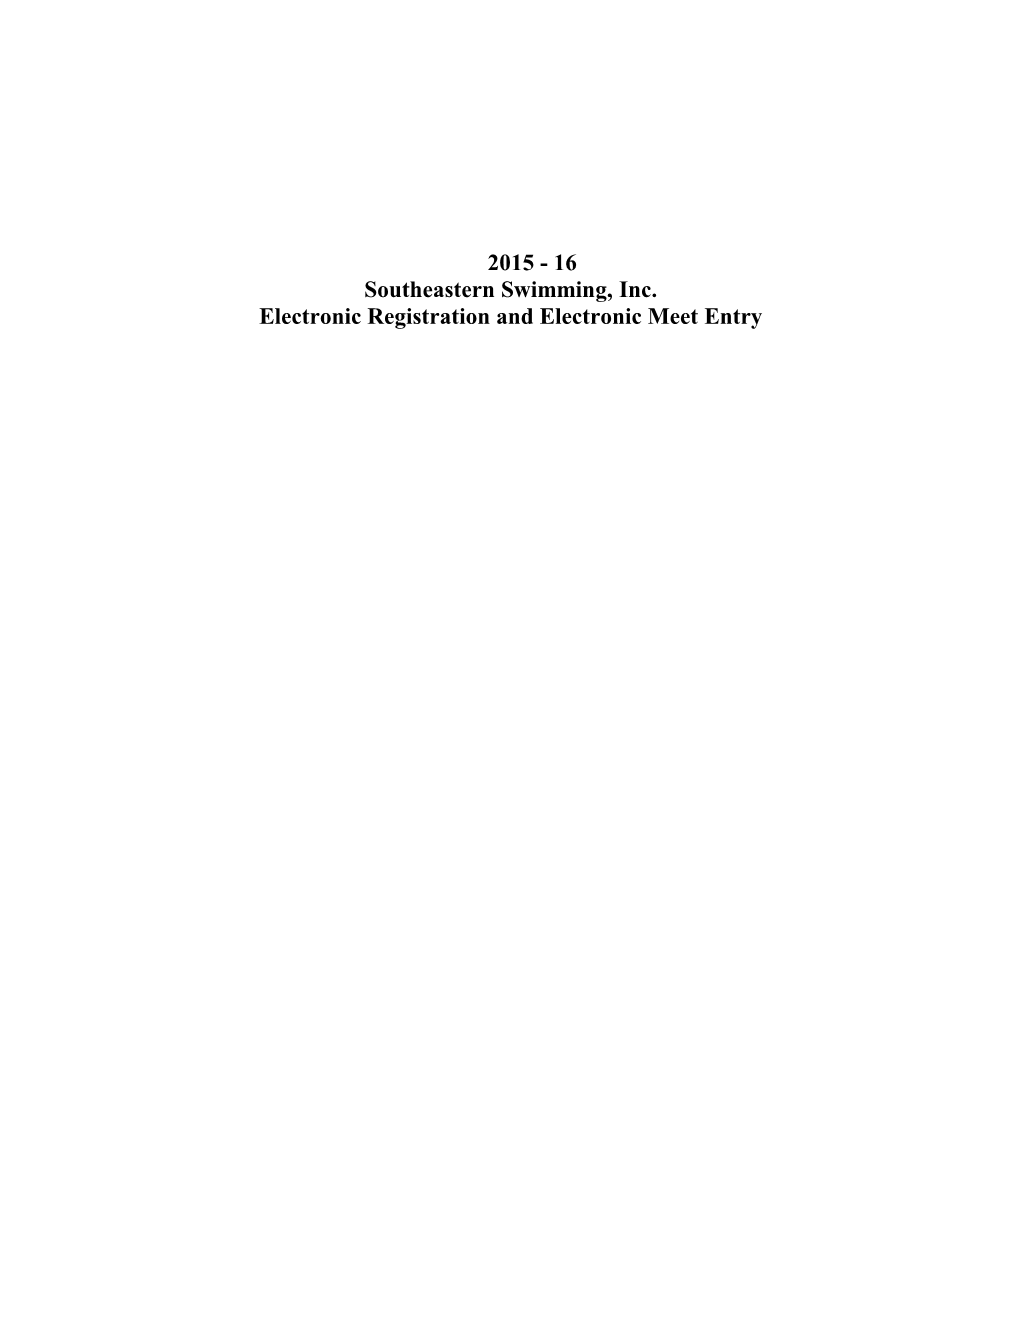 Electronic Registration and Electronic Meetentry